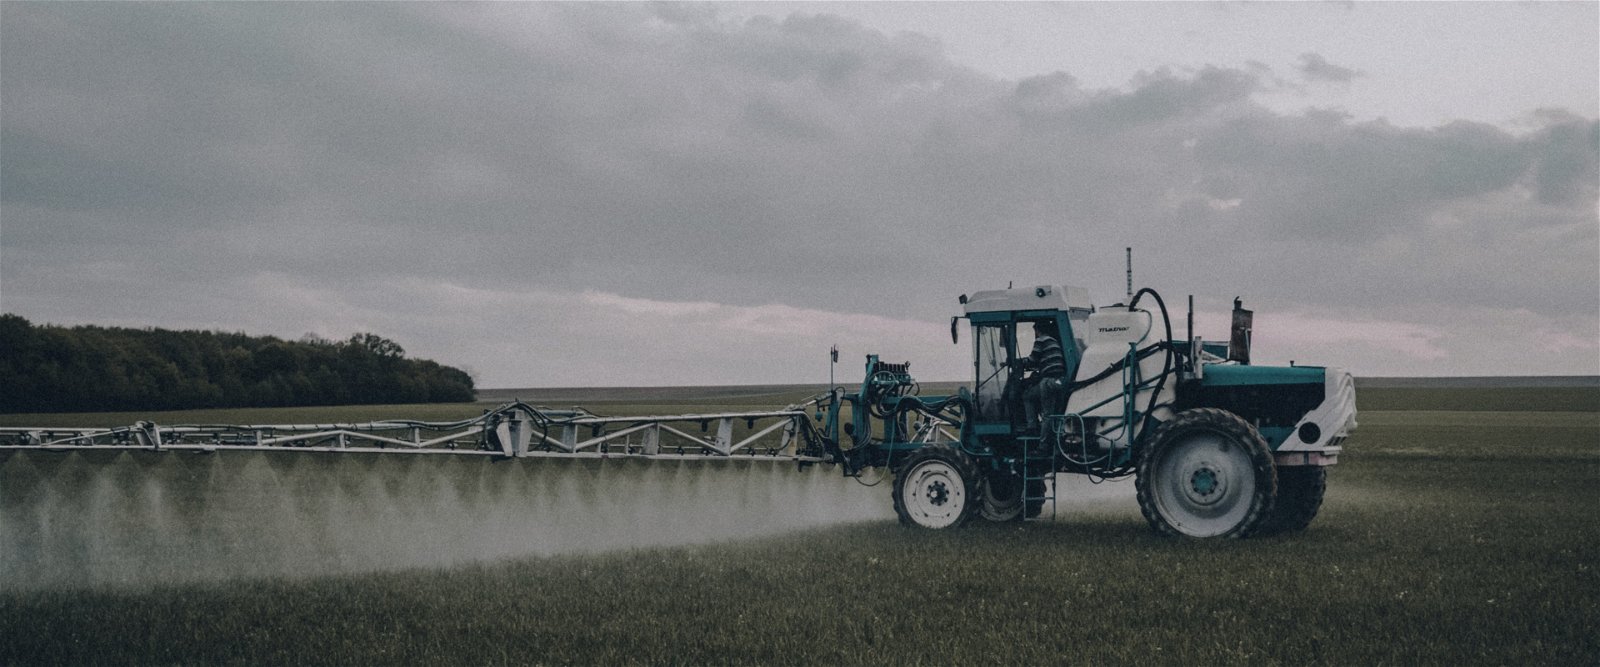 A tractor spraying water on a field 